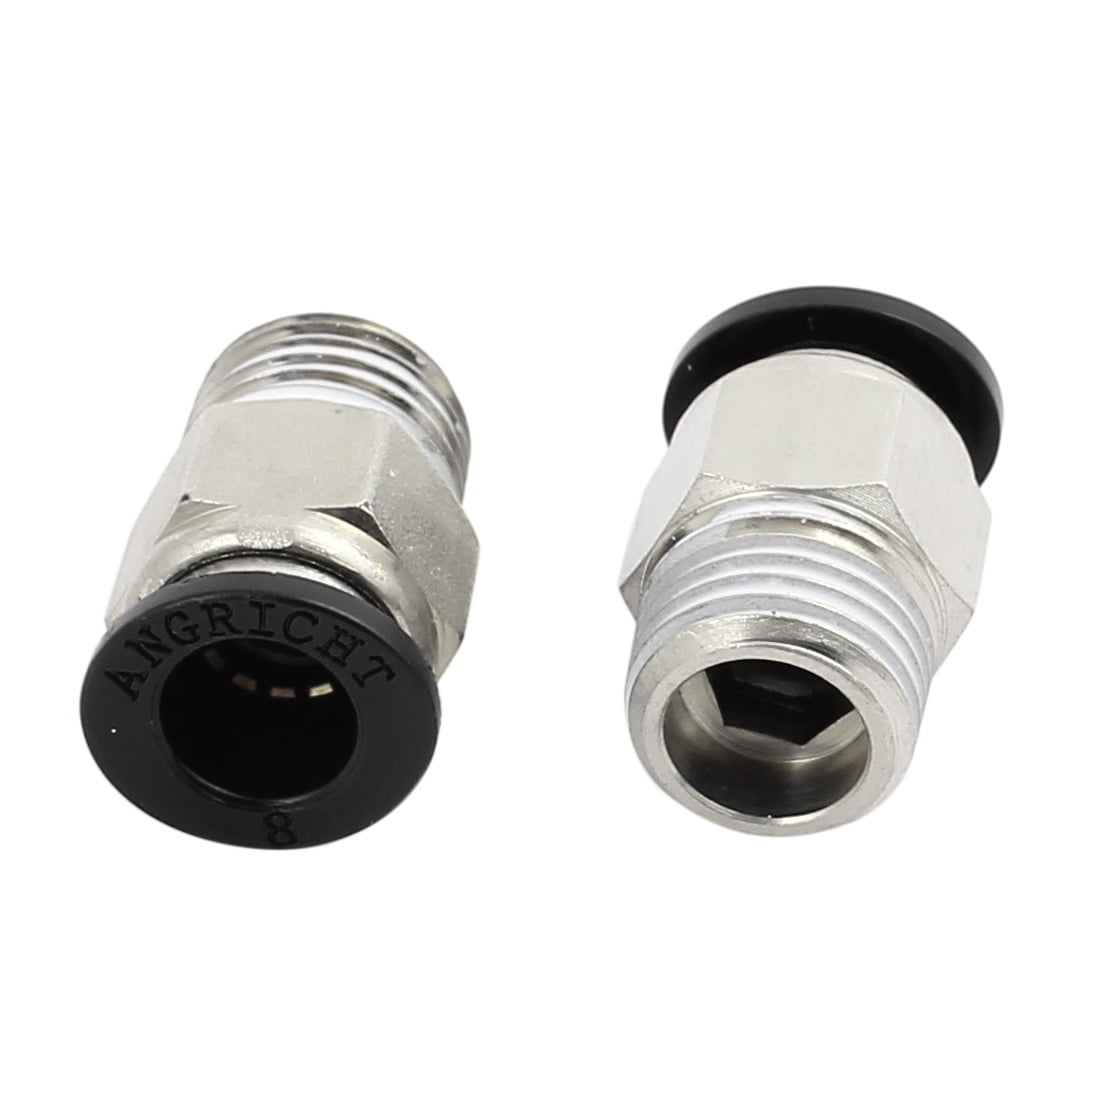 3 Pcs 1/4 PT Male Thread 8mm Push in Joint Pneumatic Connector Quick Fitting 